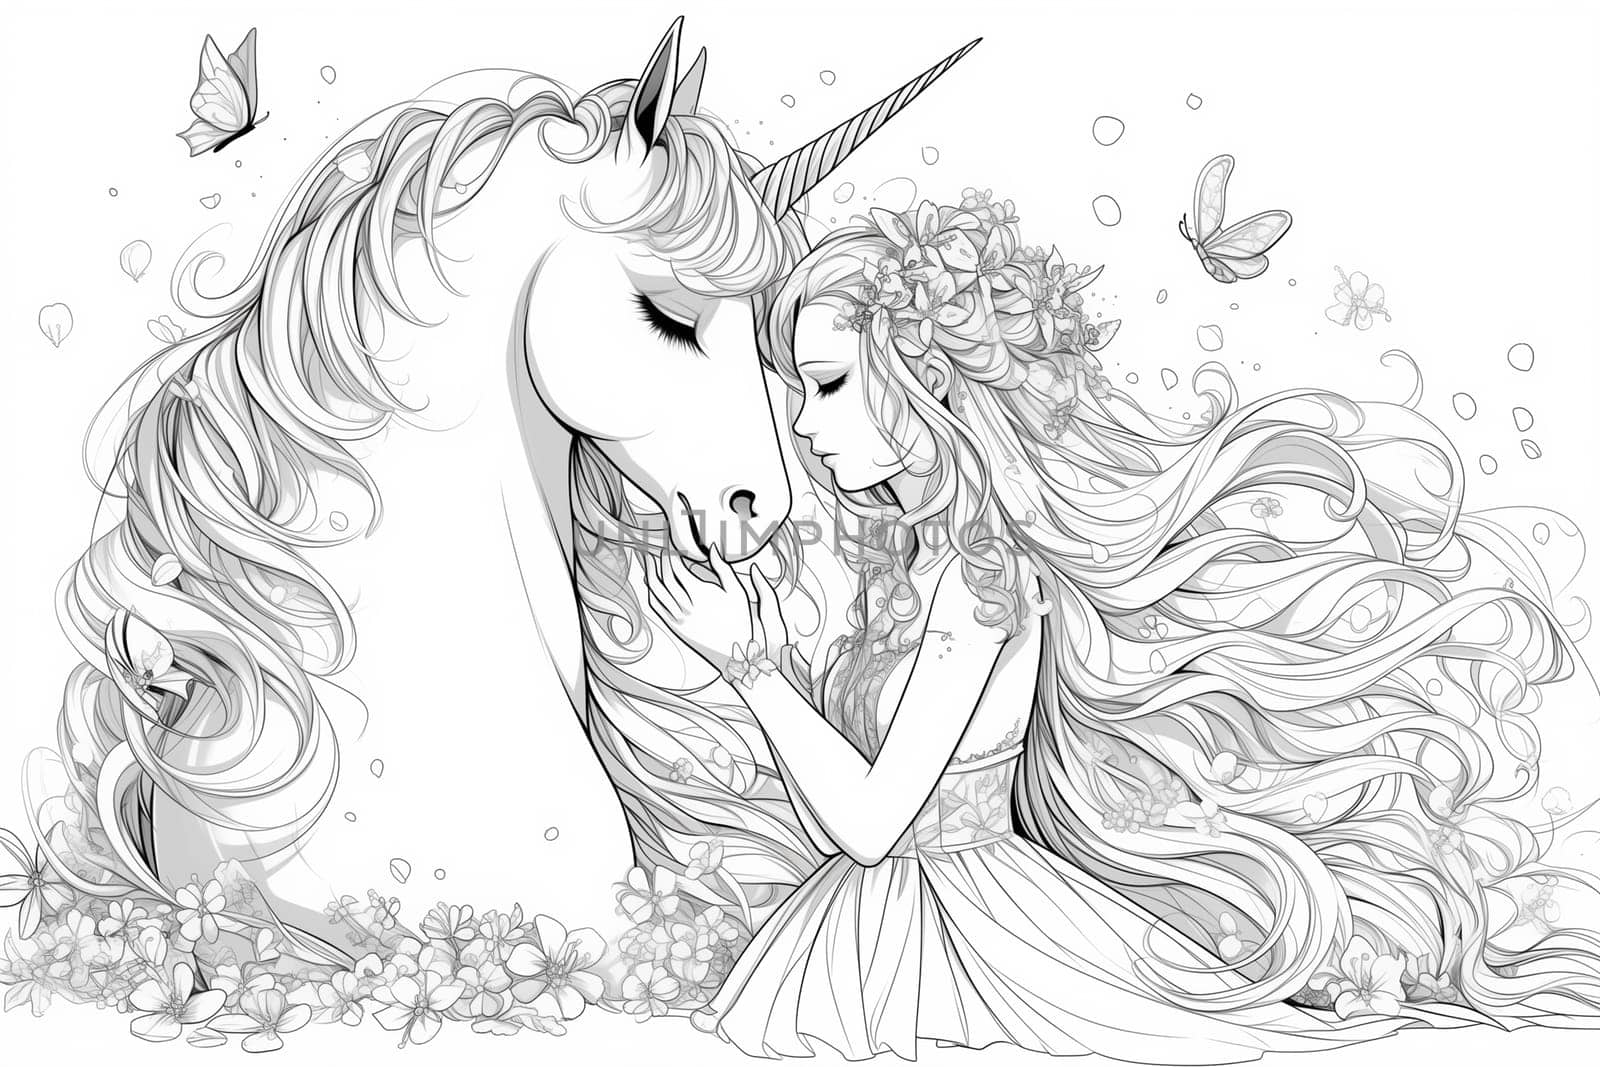 A black and white drawing of a young girl embracing a majestic unicorn in a tender moment.